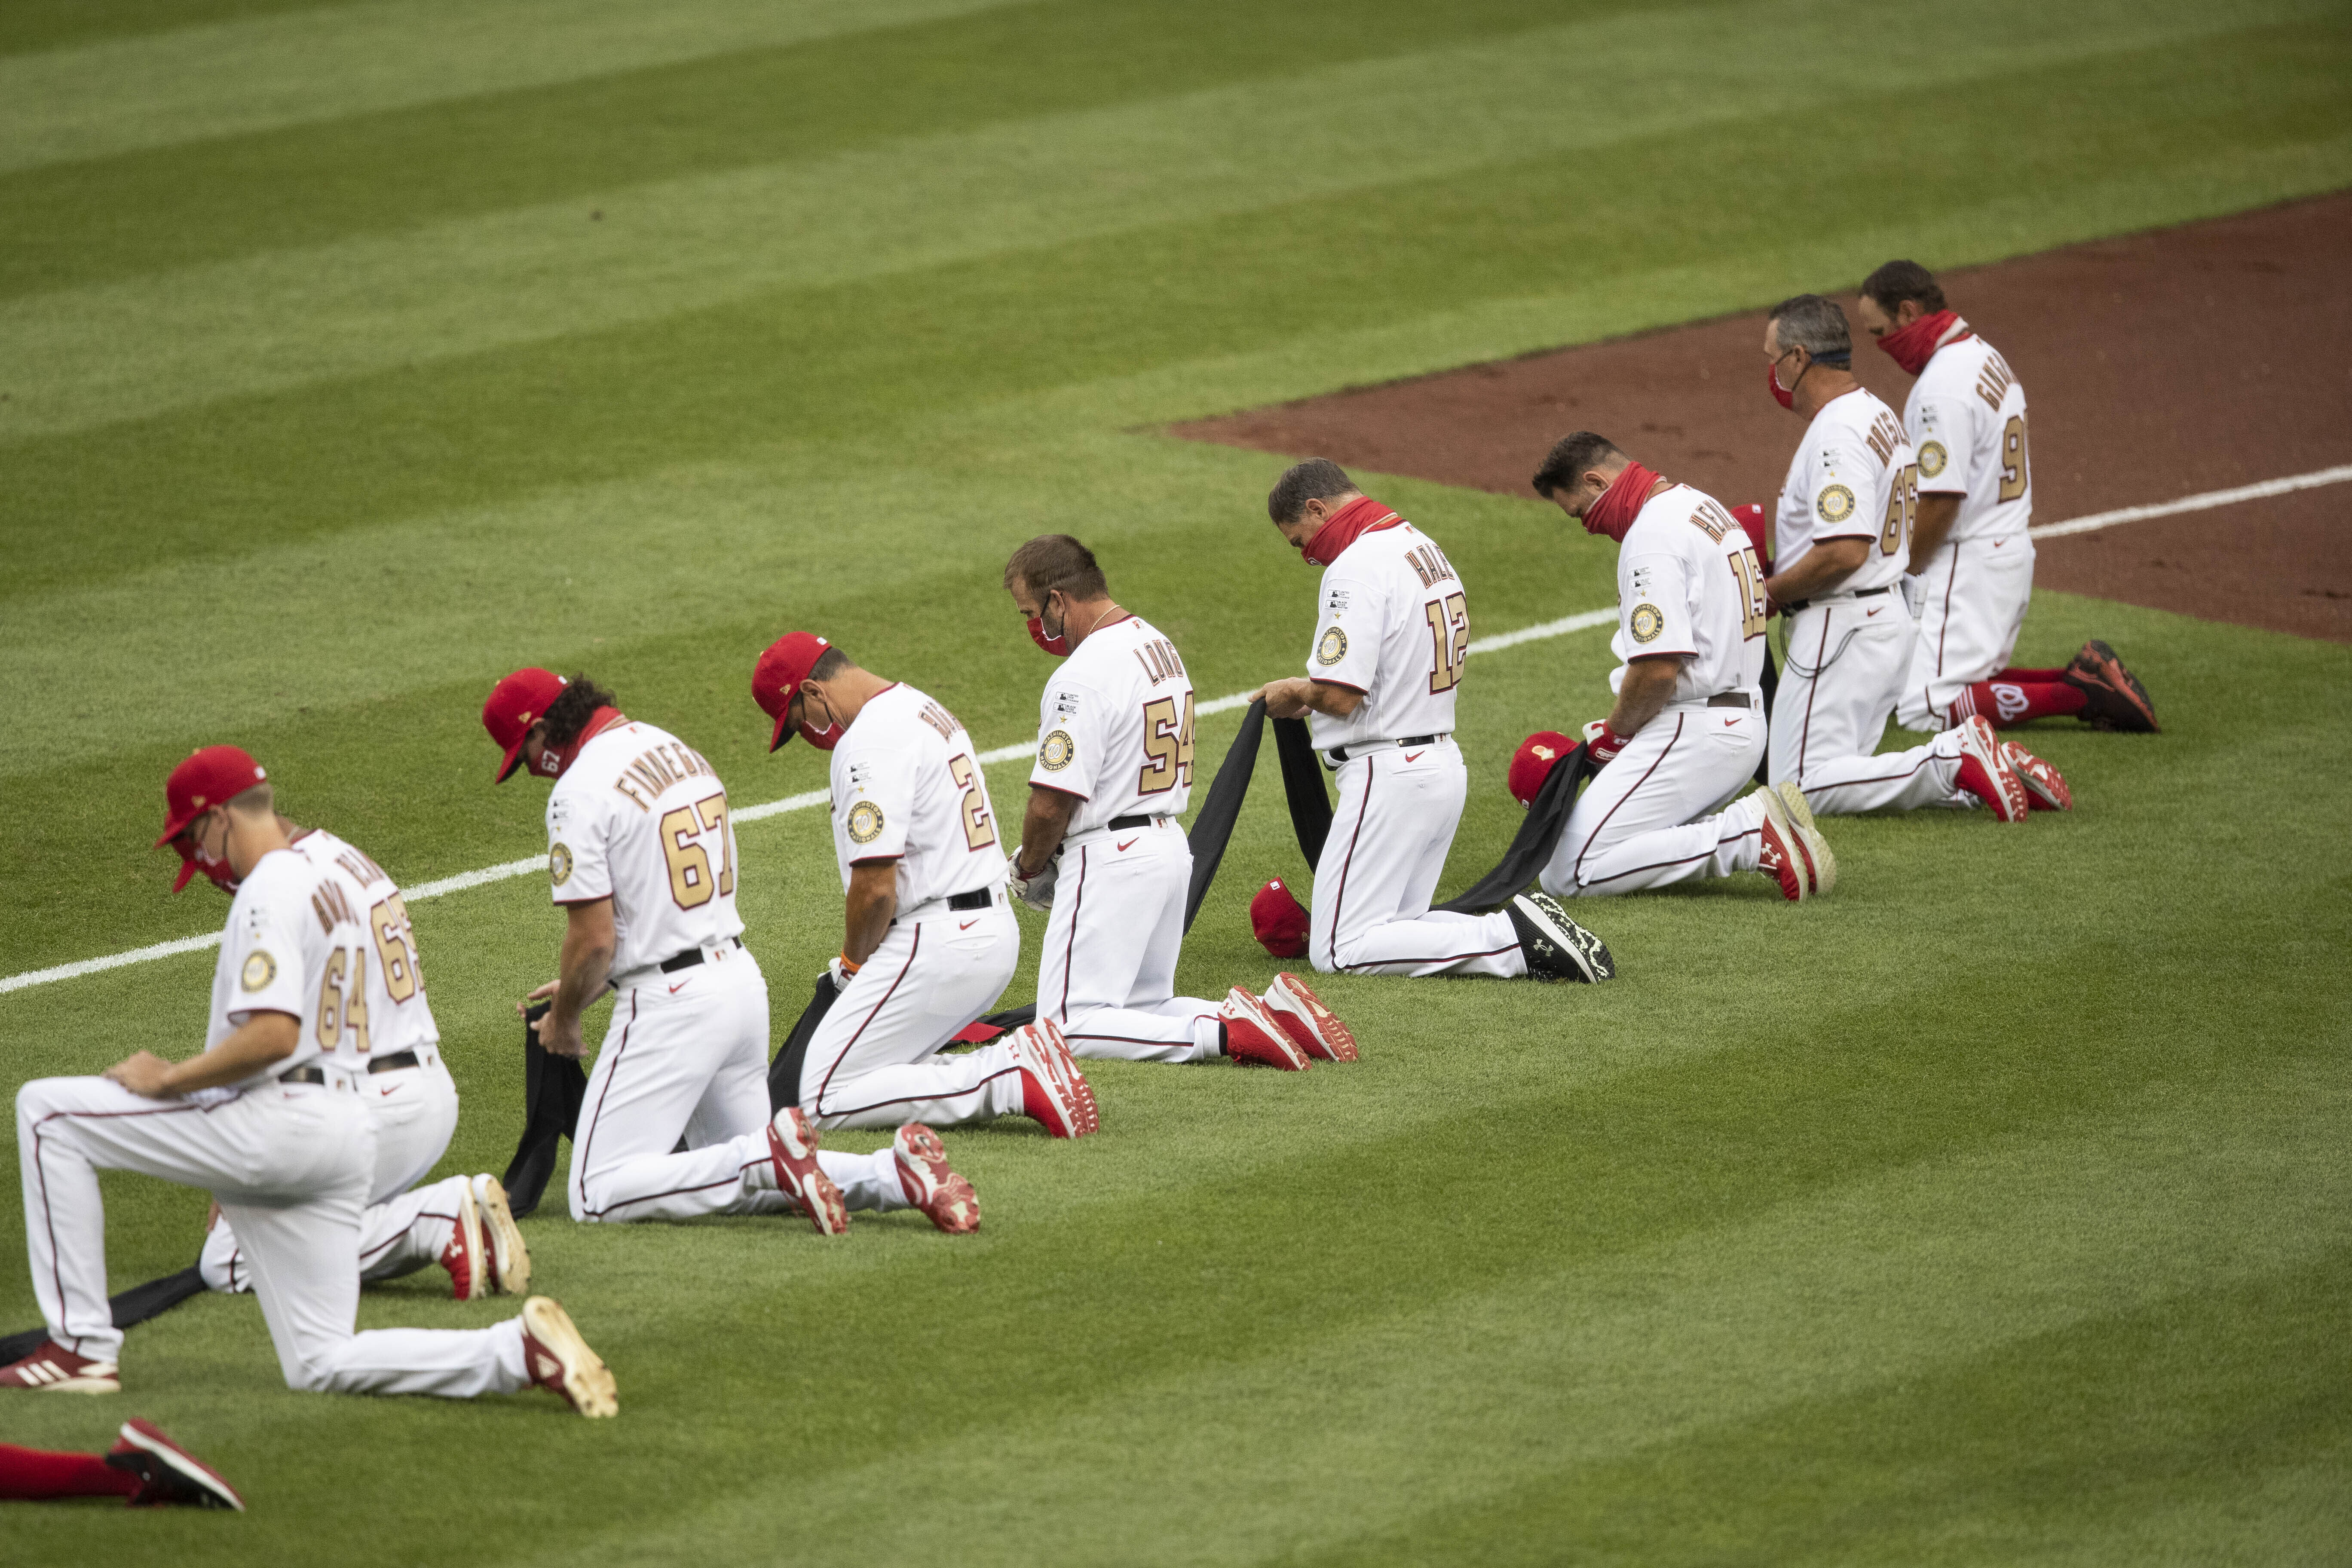 members of the St. Louis Cardinals stand for the National Anthem